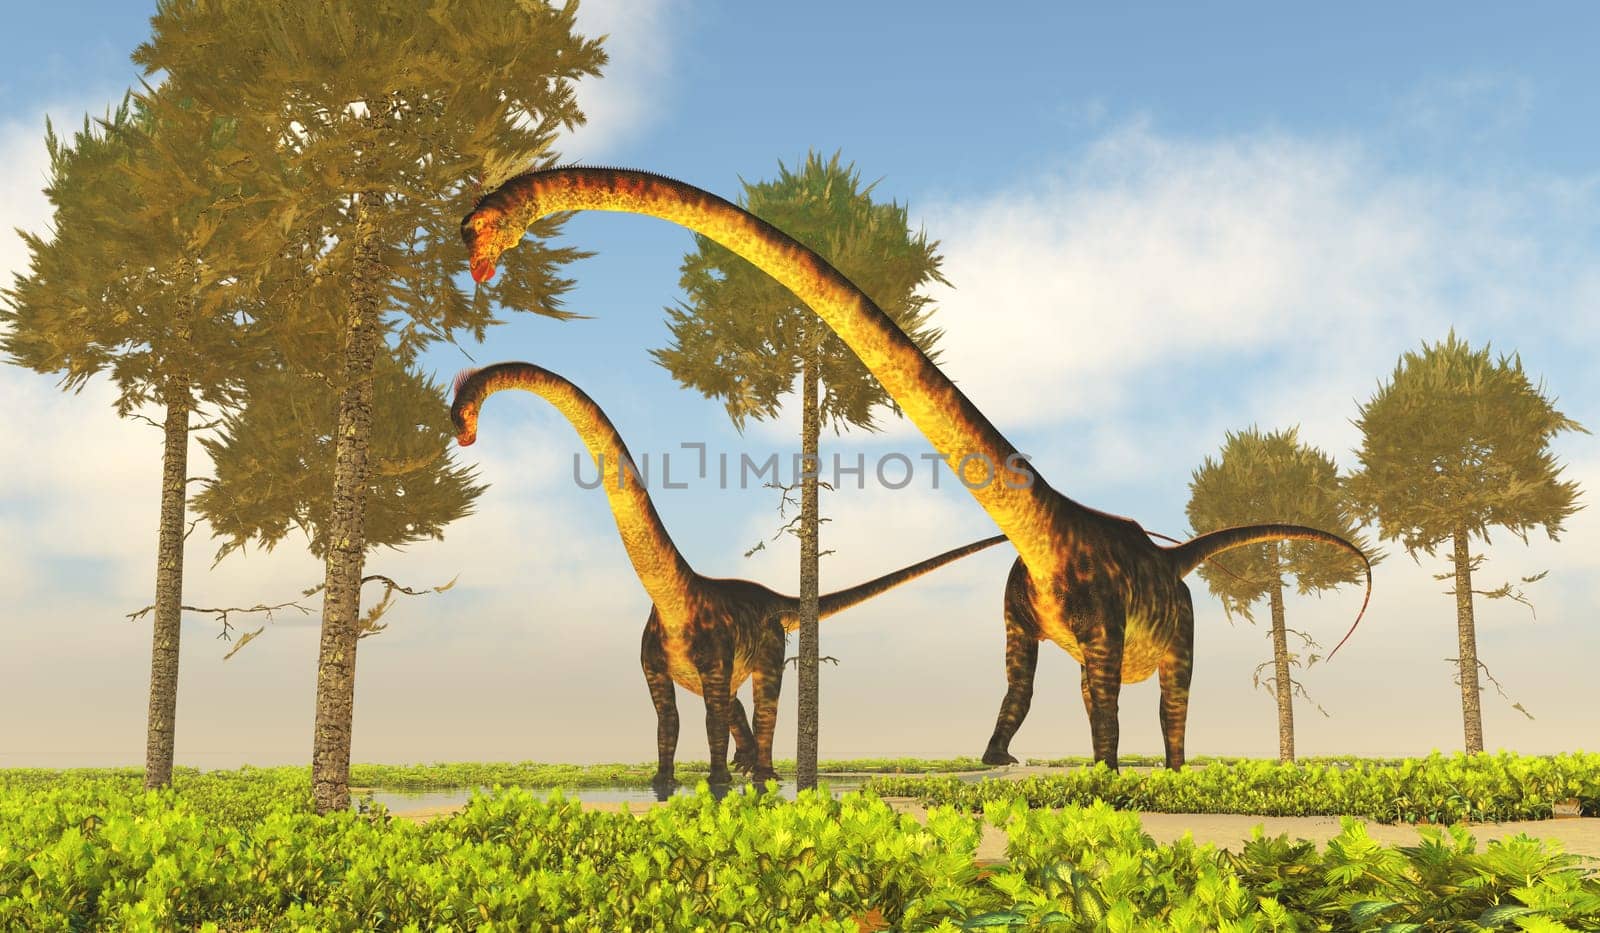 Barosaurus dinosaurs munch on Monkey Puzzle trees during the Jurassic Period of the United States.